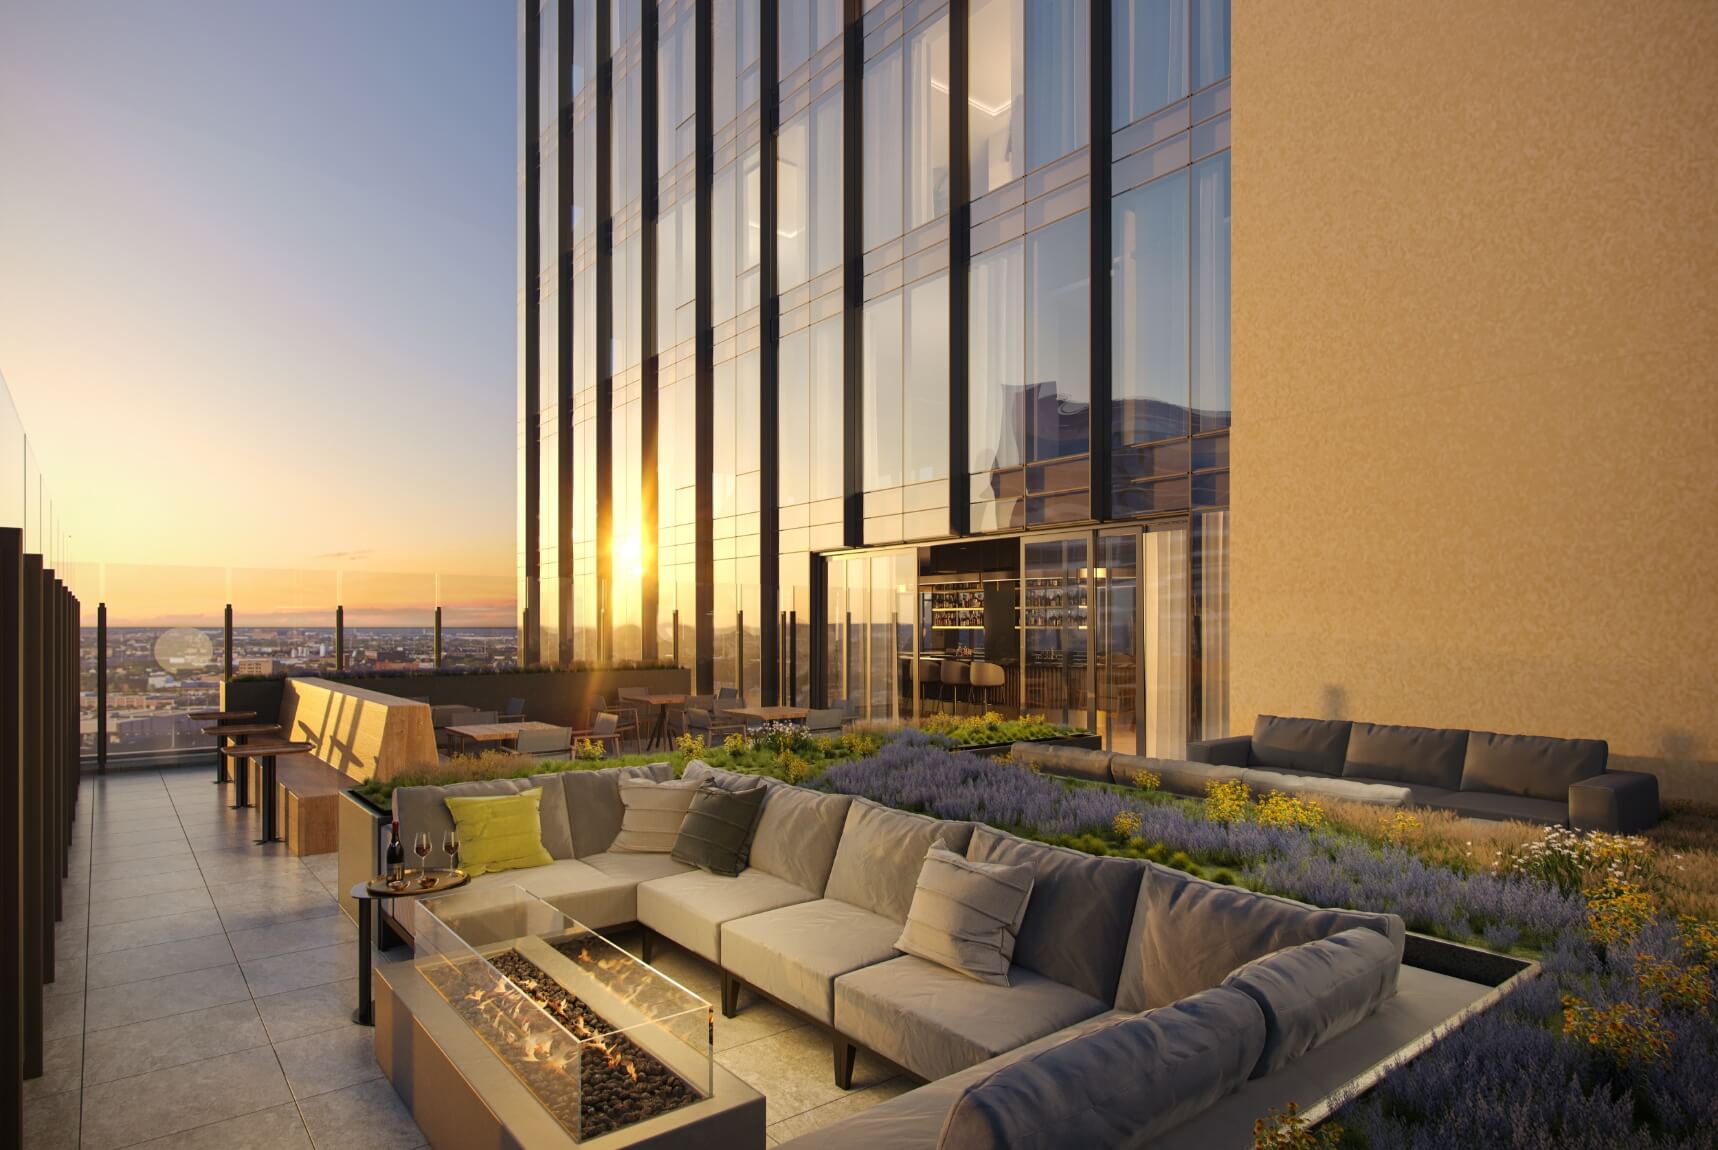 An artist's rendering of a 55+ independent living rooftop with couches and fire pits.